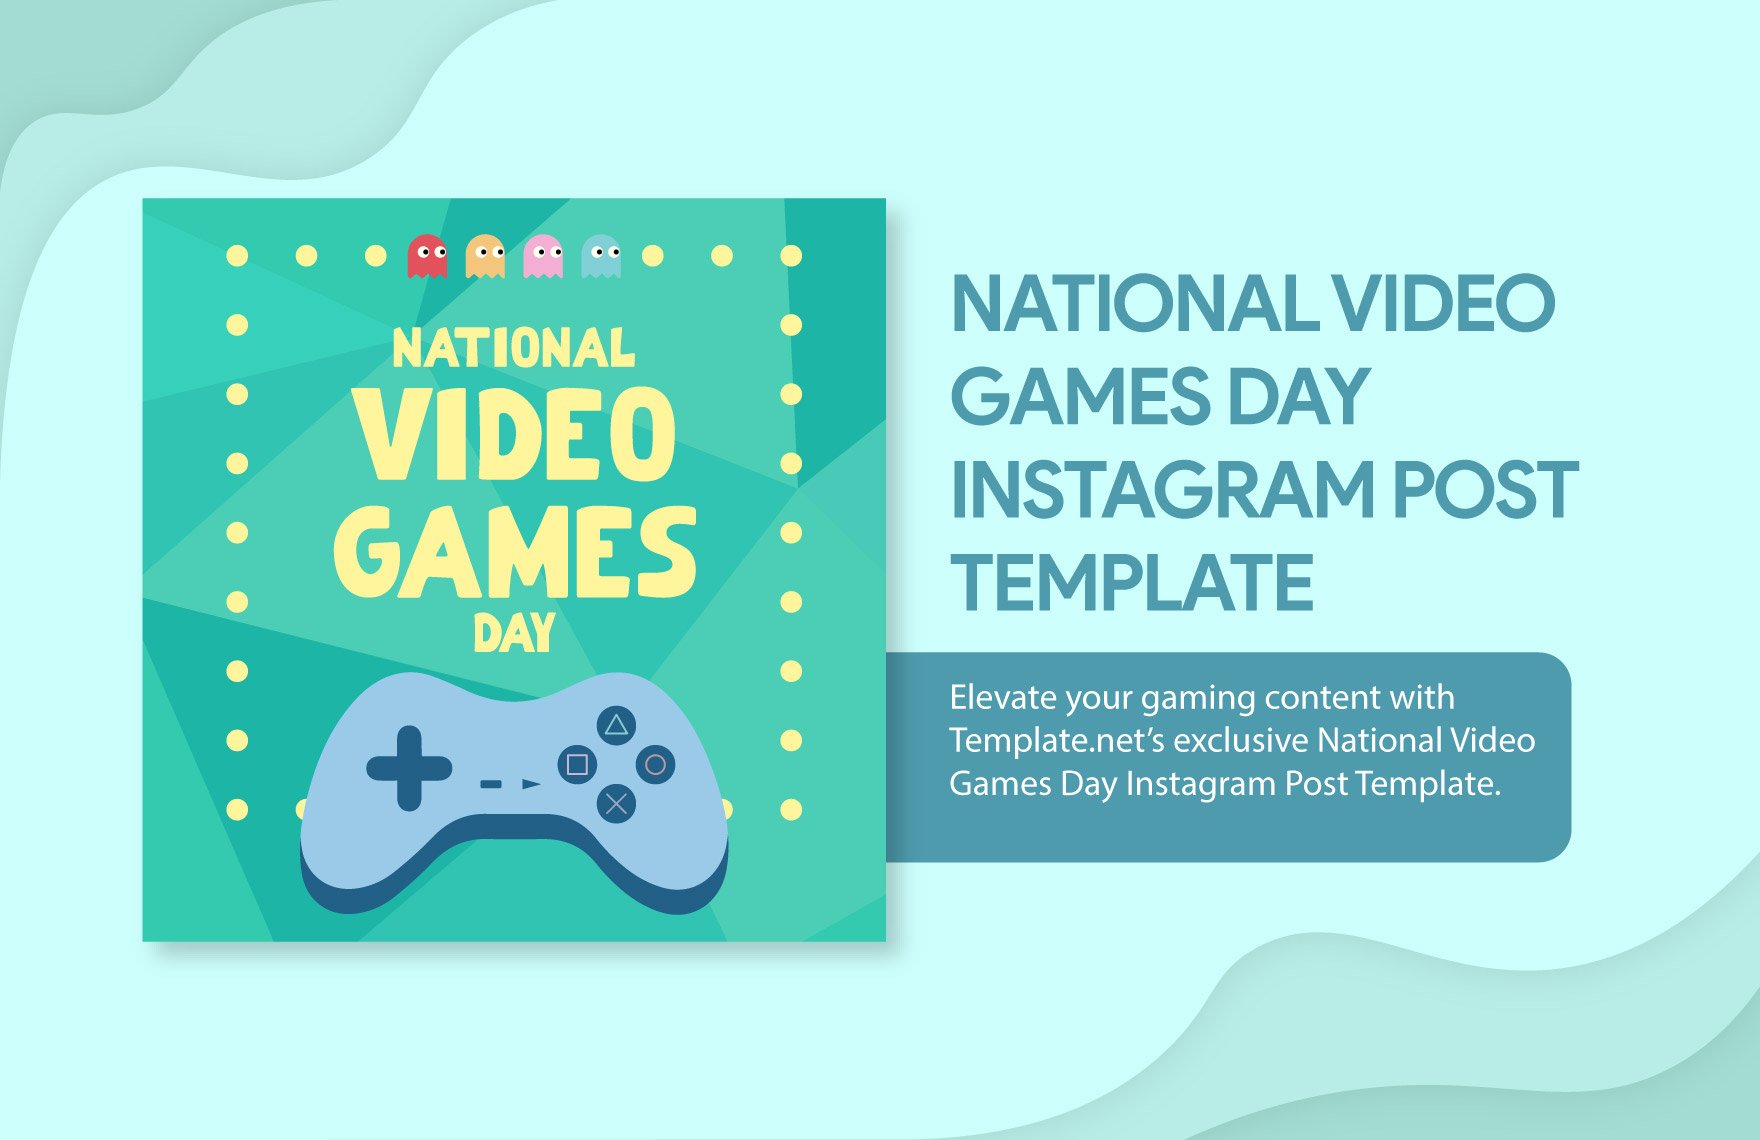 Free National Video Games Day Instagram Post Template in Illustrator, PSD, PNG